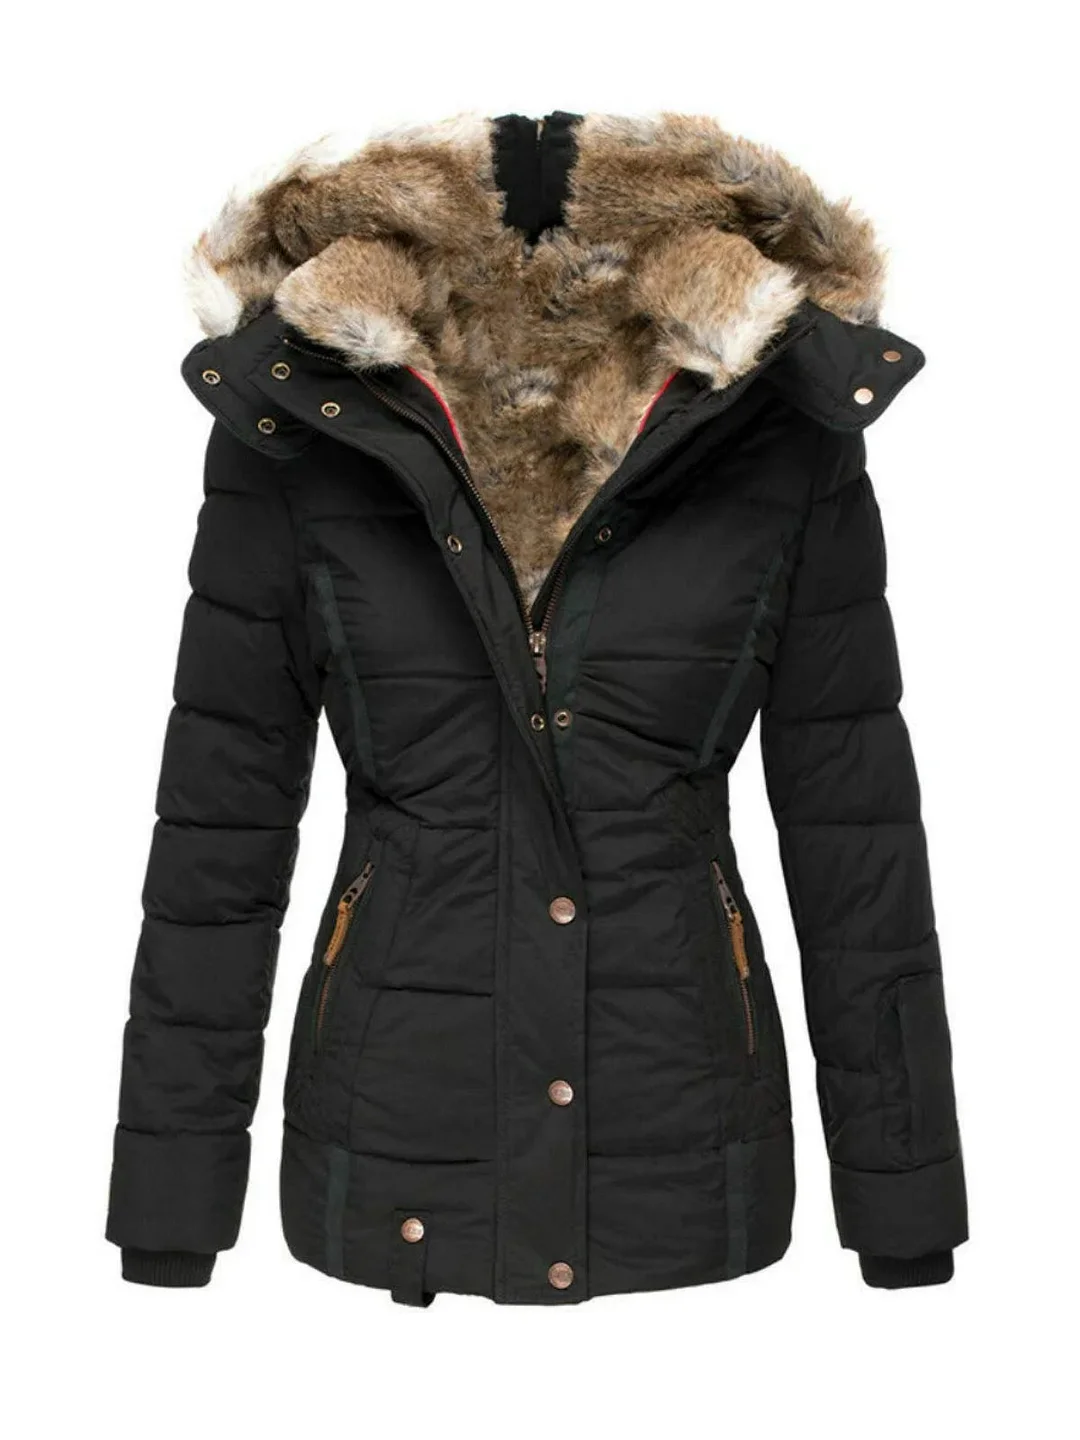 Women's Winter Hooded Parka Coat with Faux Fur Lined Outdoor Windproof Coat